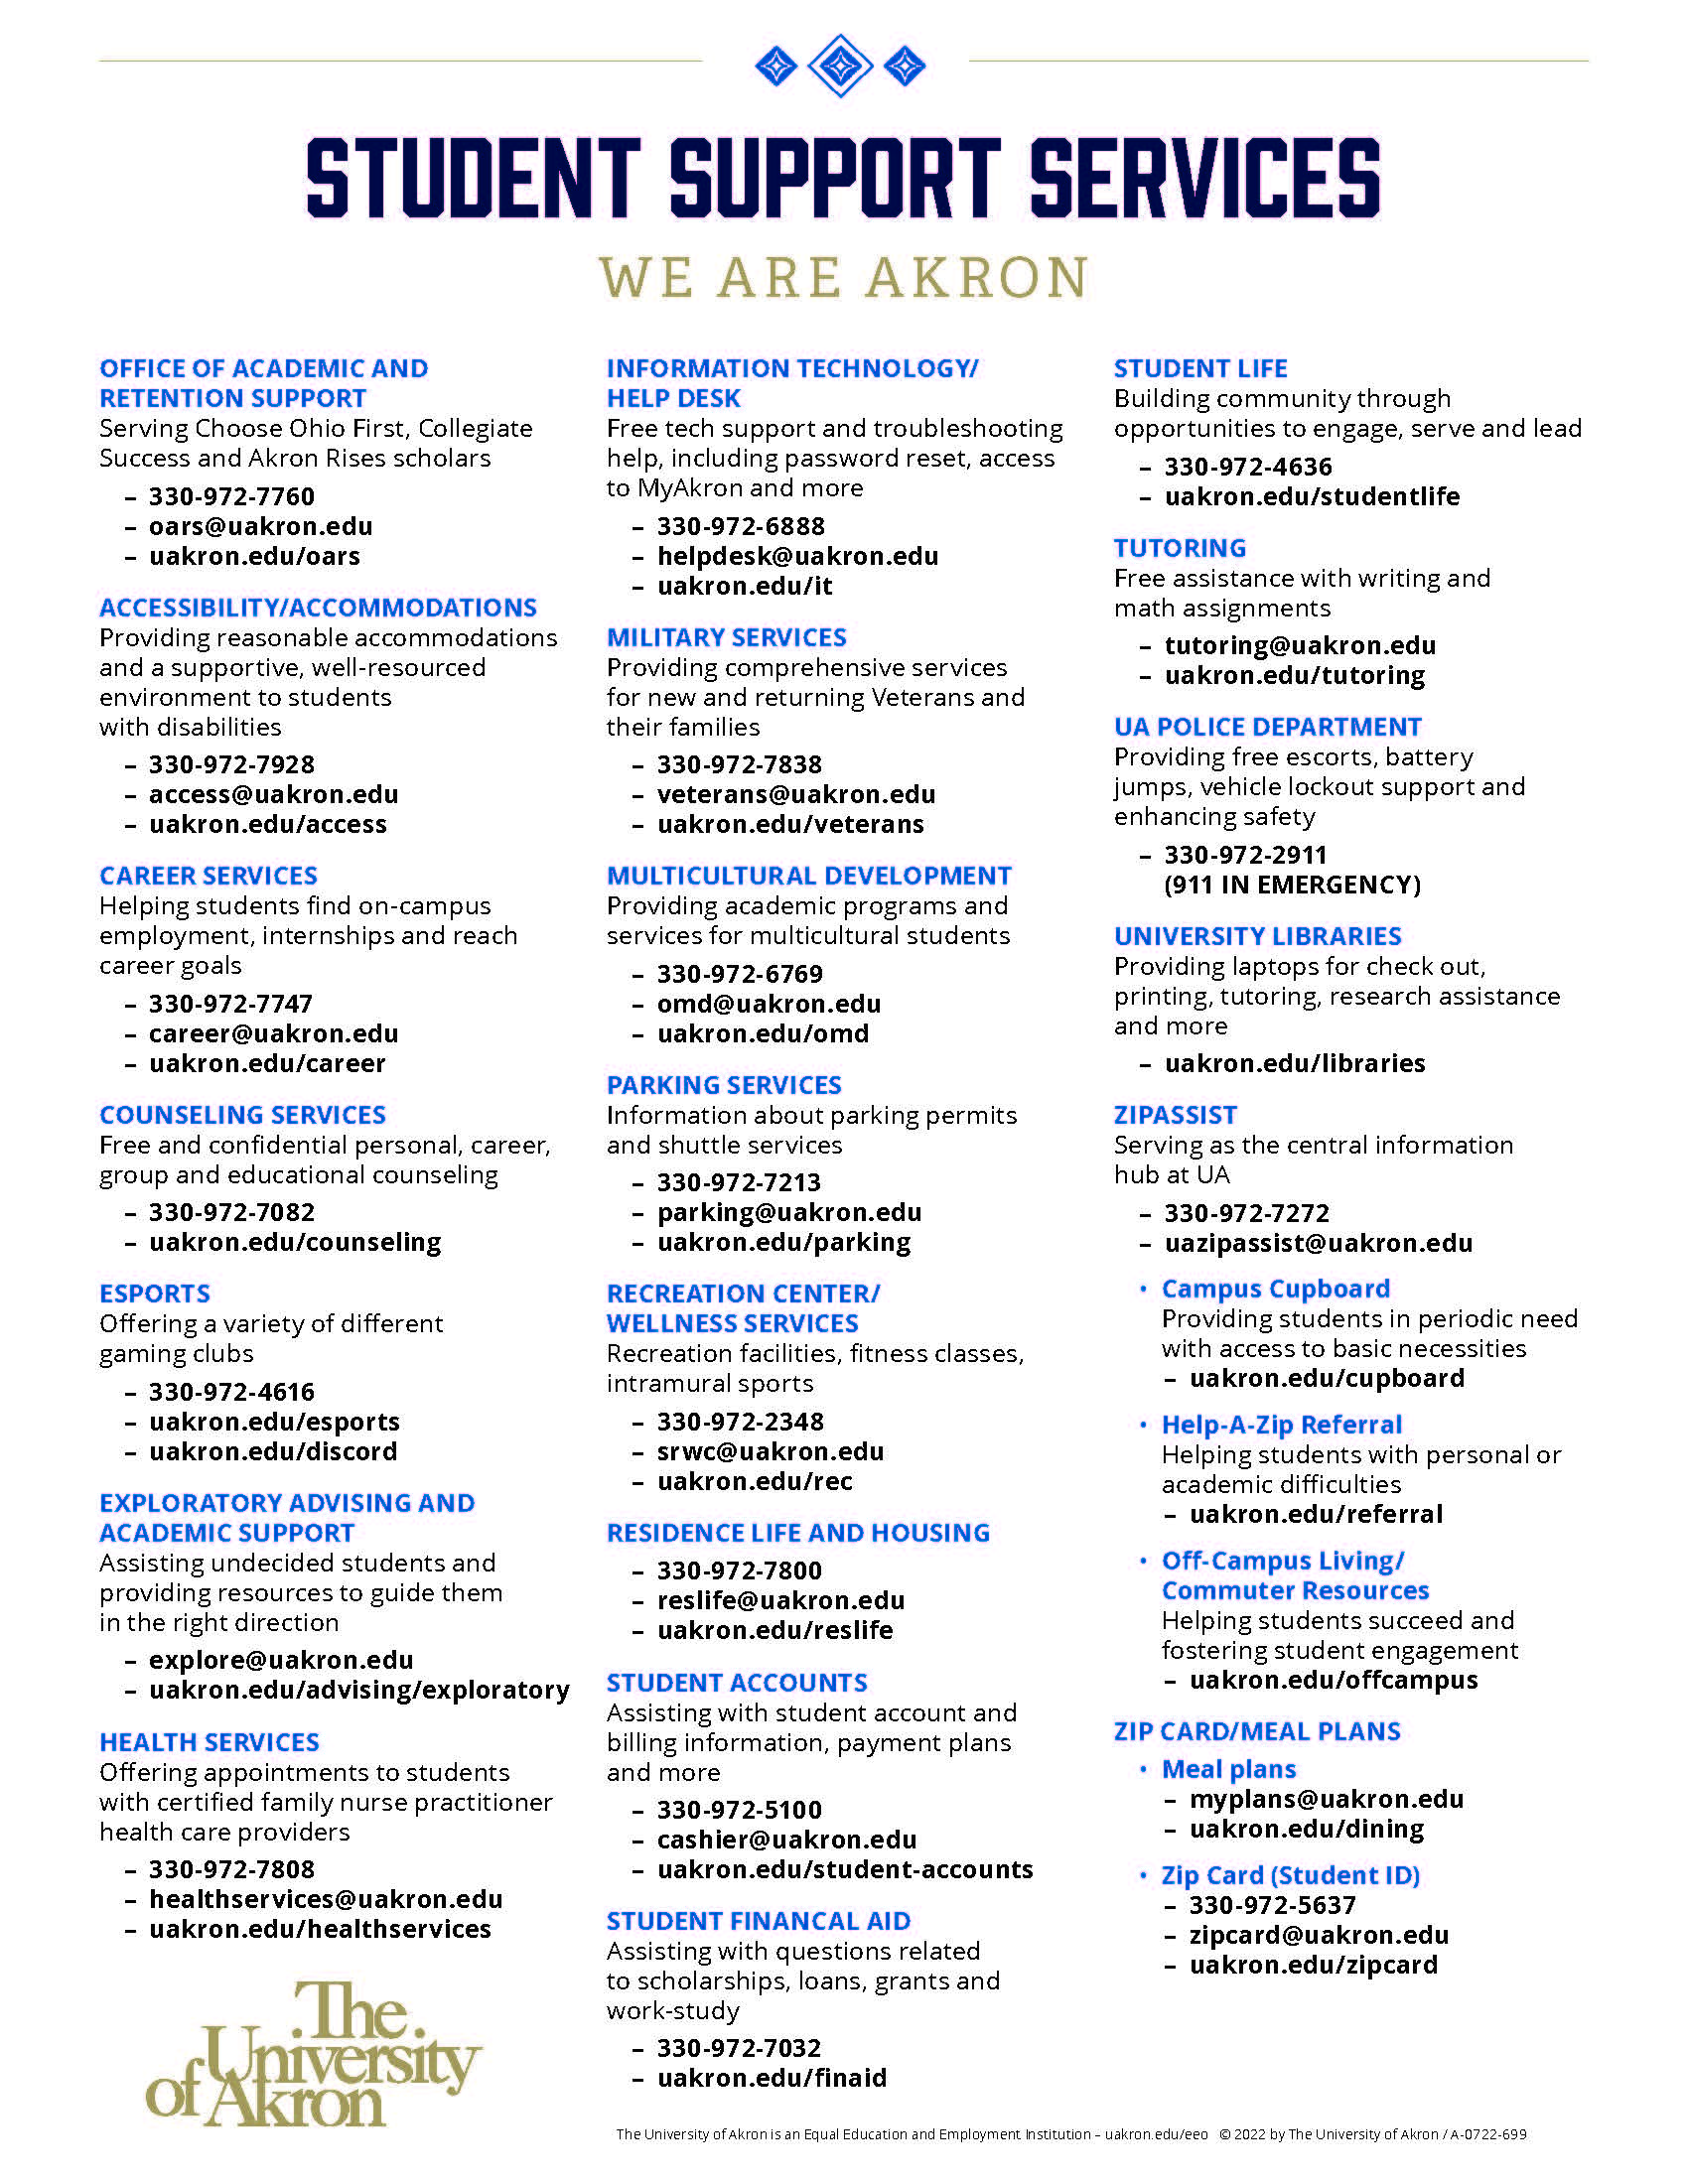 Student support services directory at the University of Akron